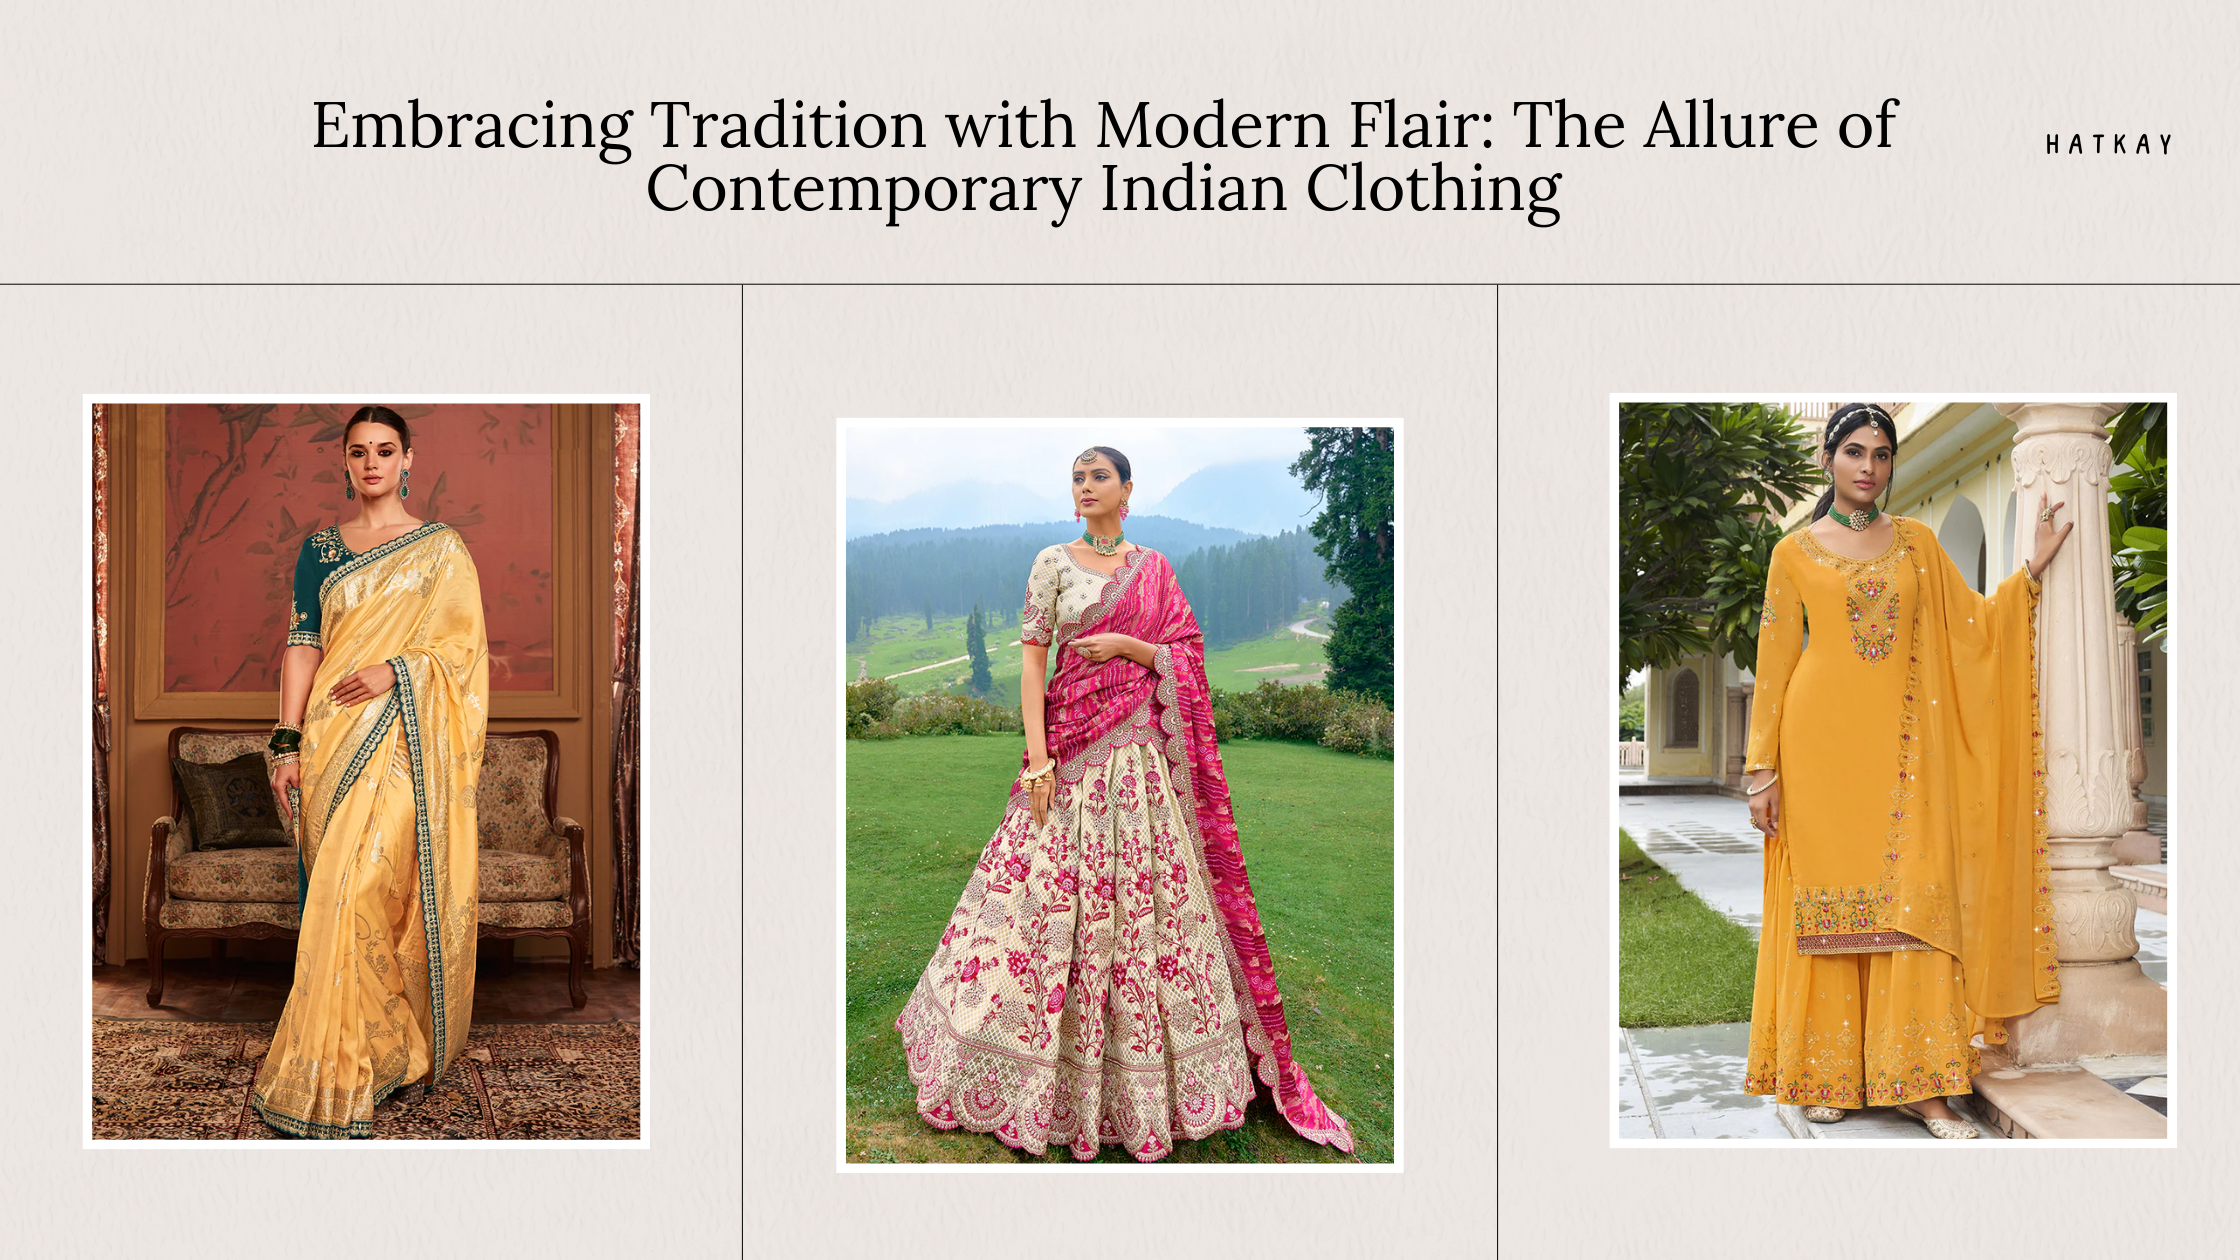 Embracing Tradition with Modern Flair: The Allure of Contemporary Indian Clothing